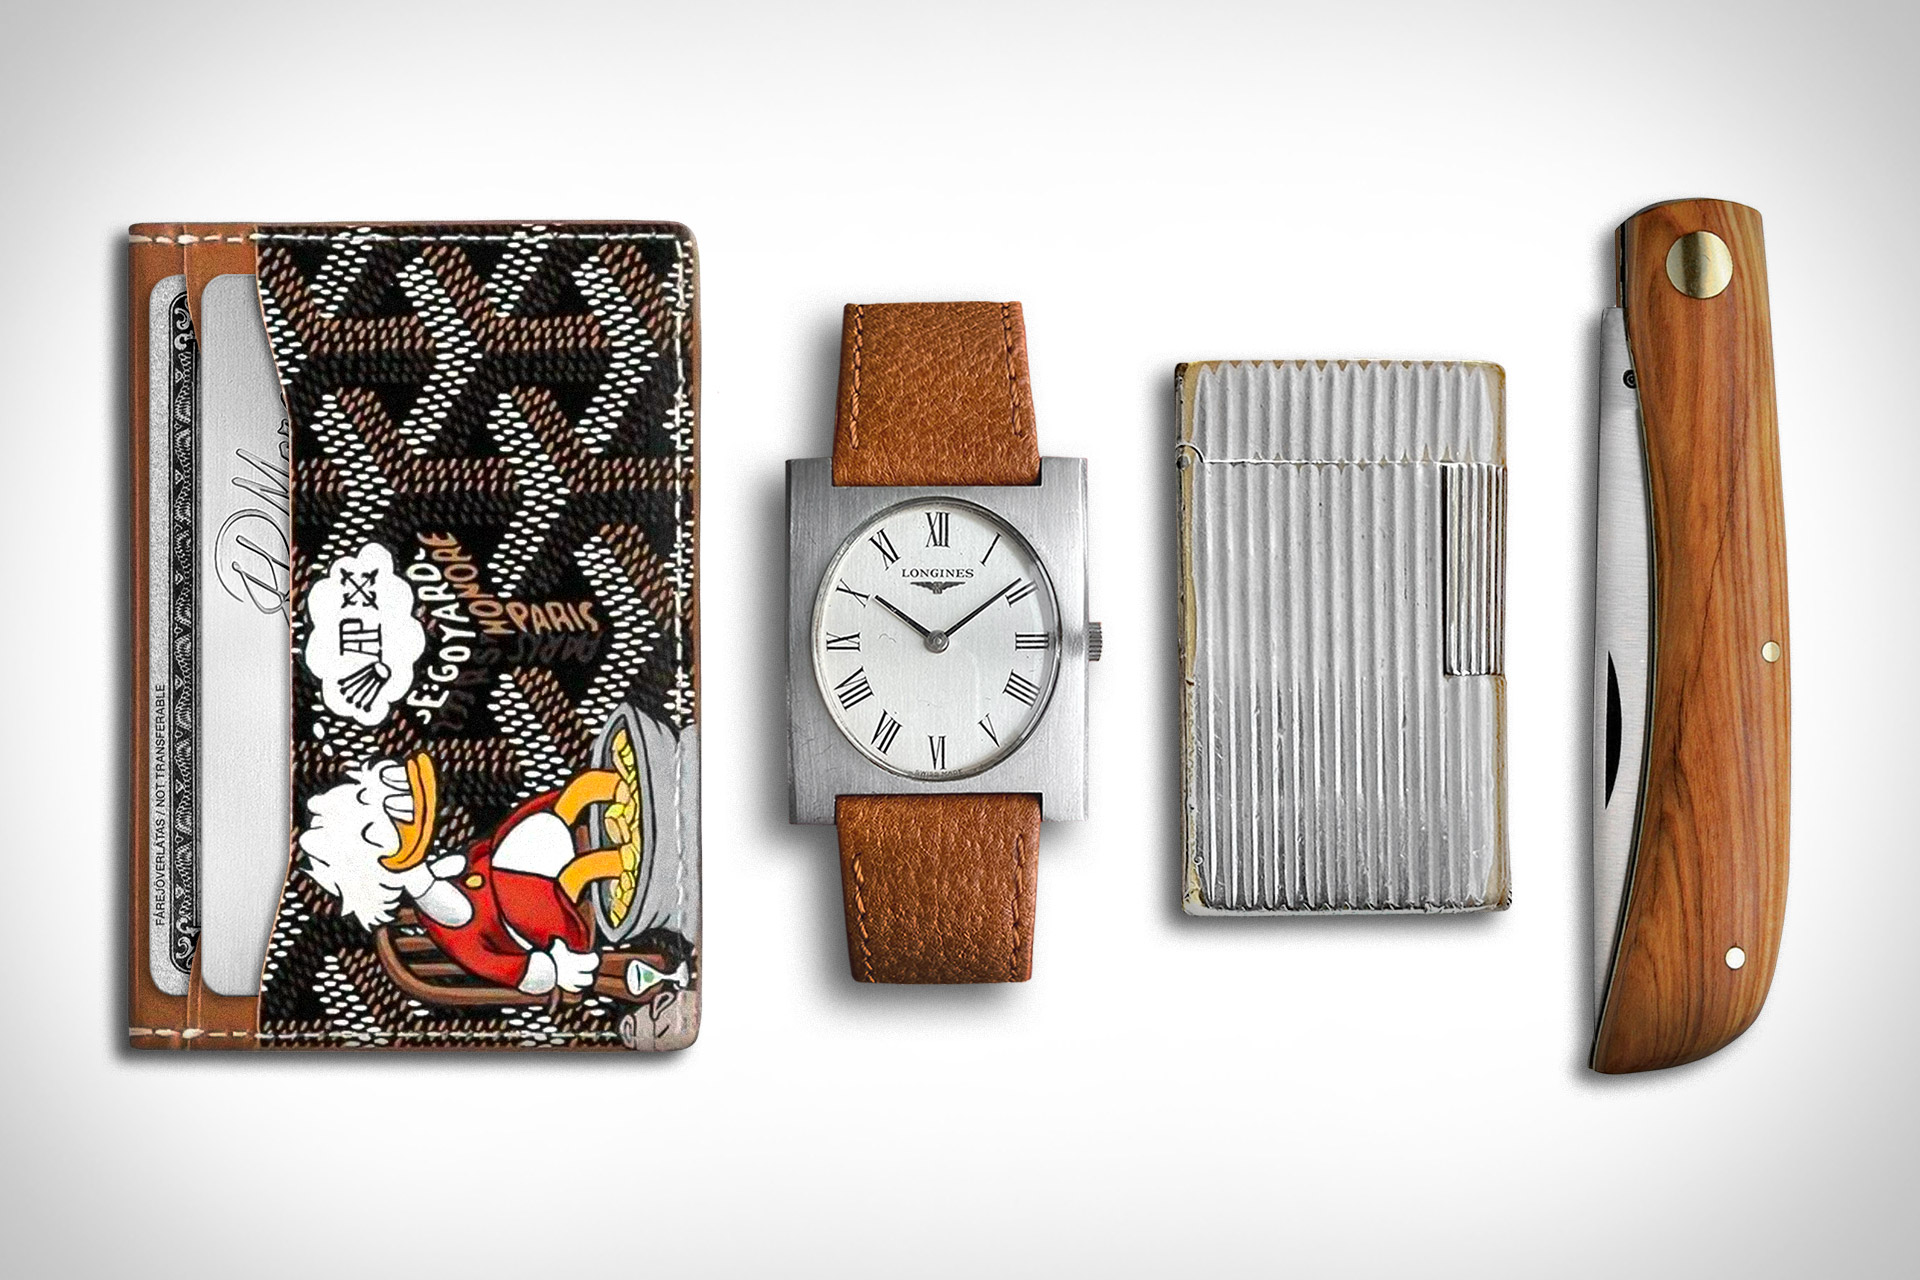 Everyday Carry: McDuck | Uncrate, #Everyday #Carry #McDuck #Uncrate